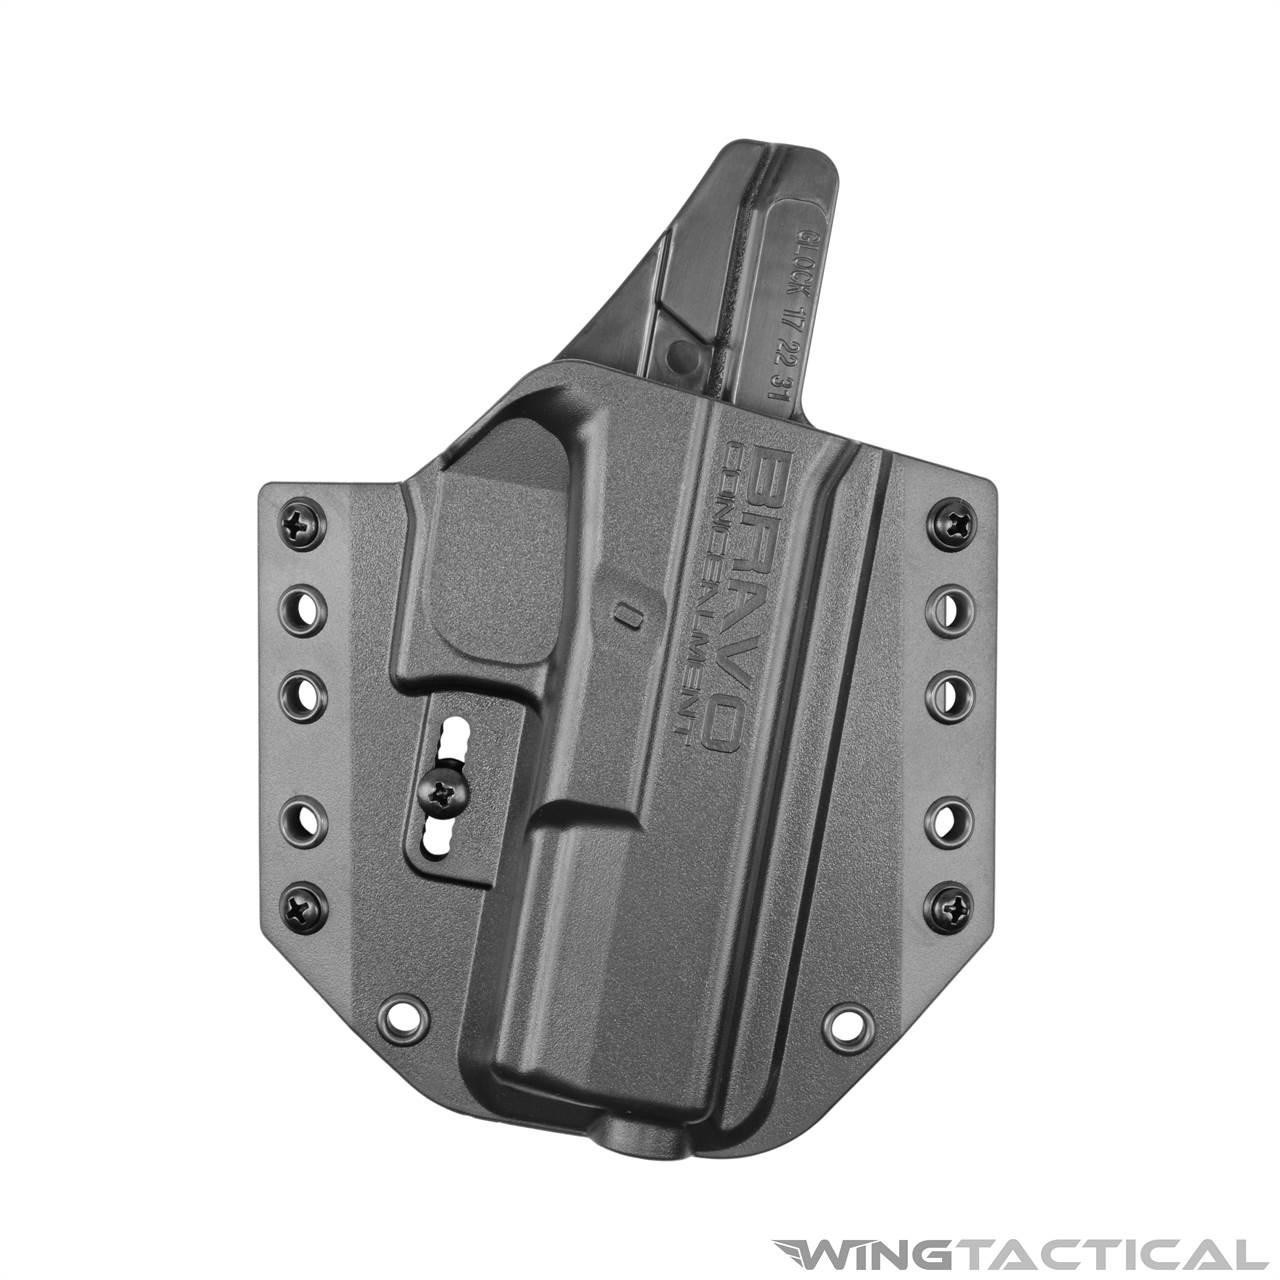  Bravo Concealment Adaptive OWB Holster for Glock 17, 22, 31 